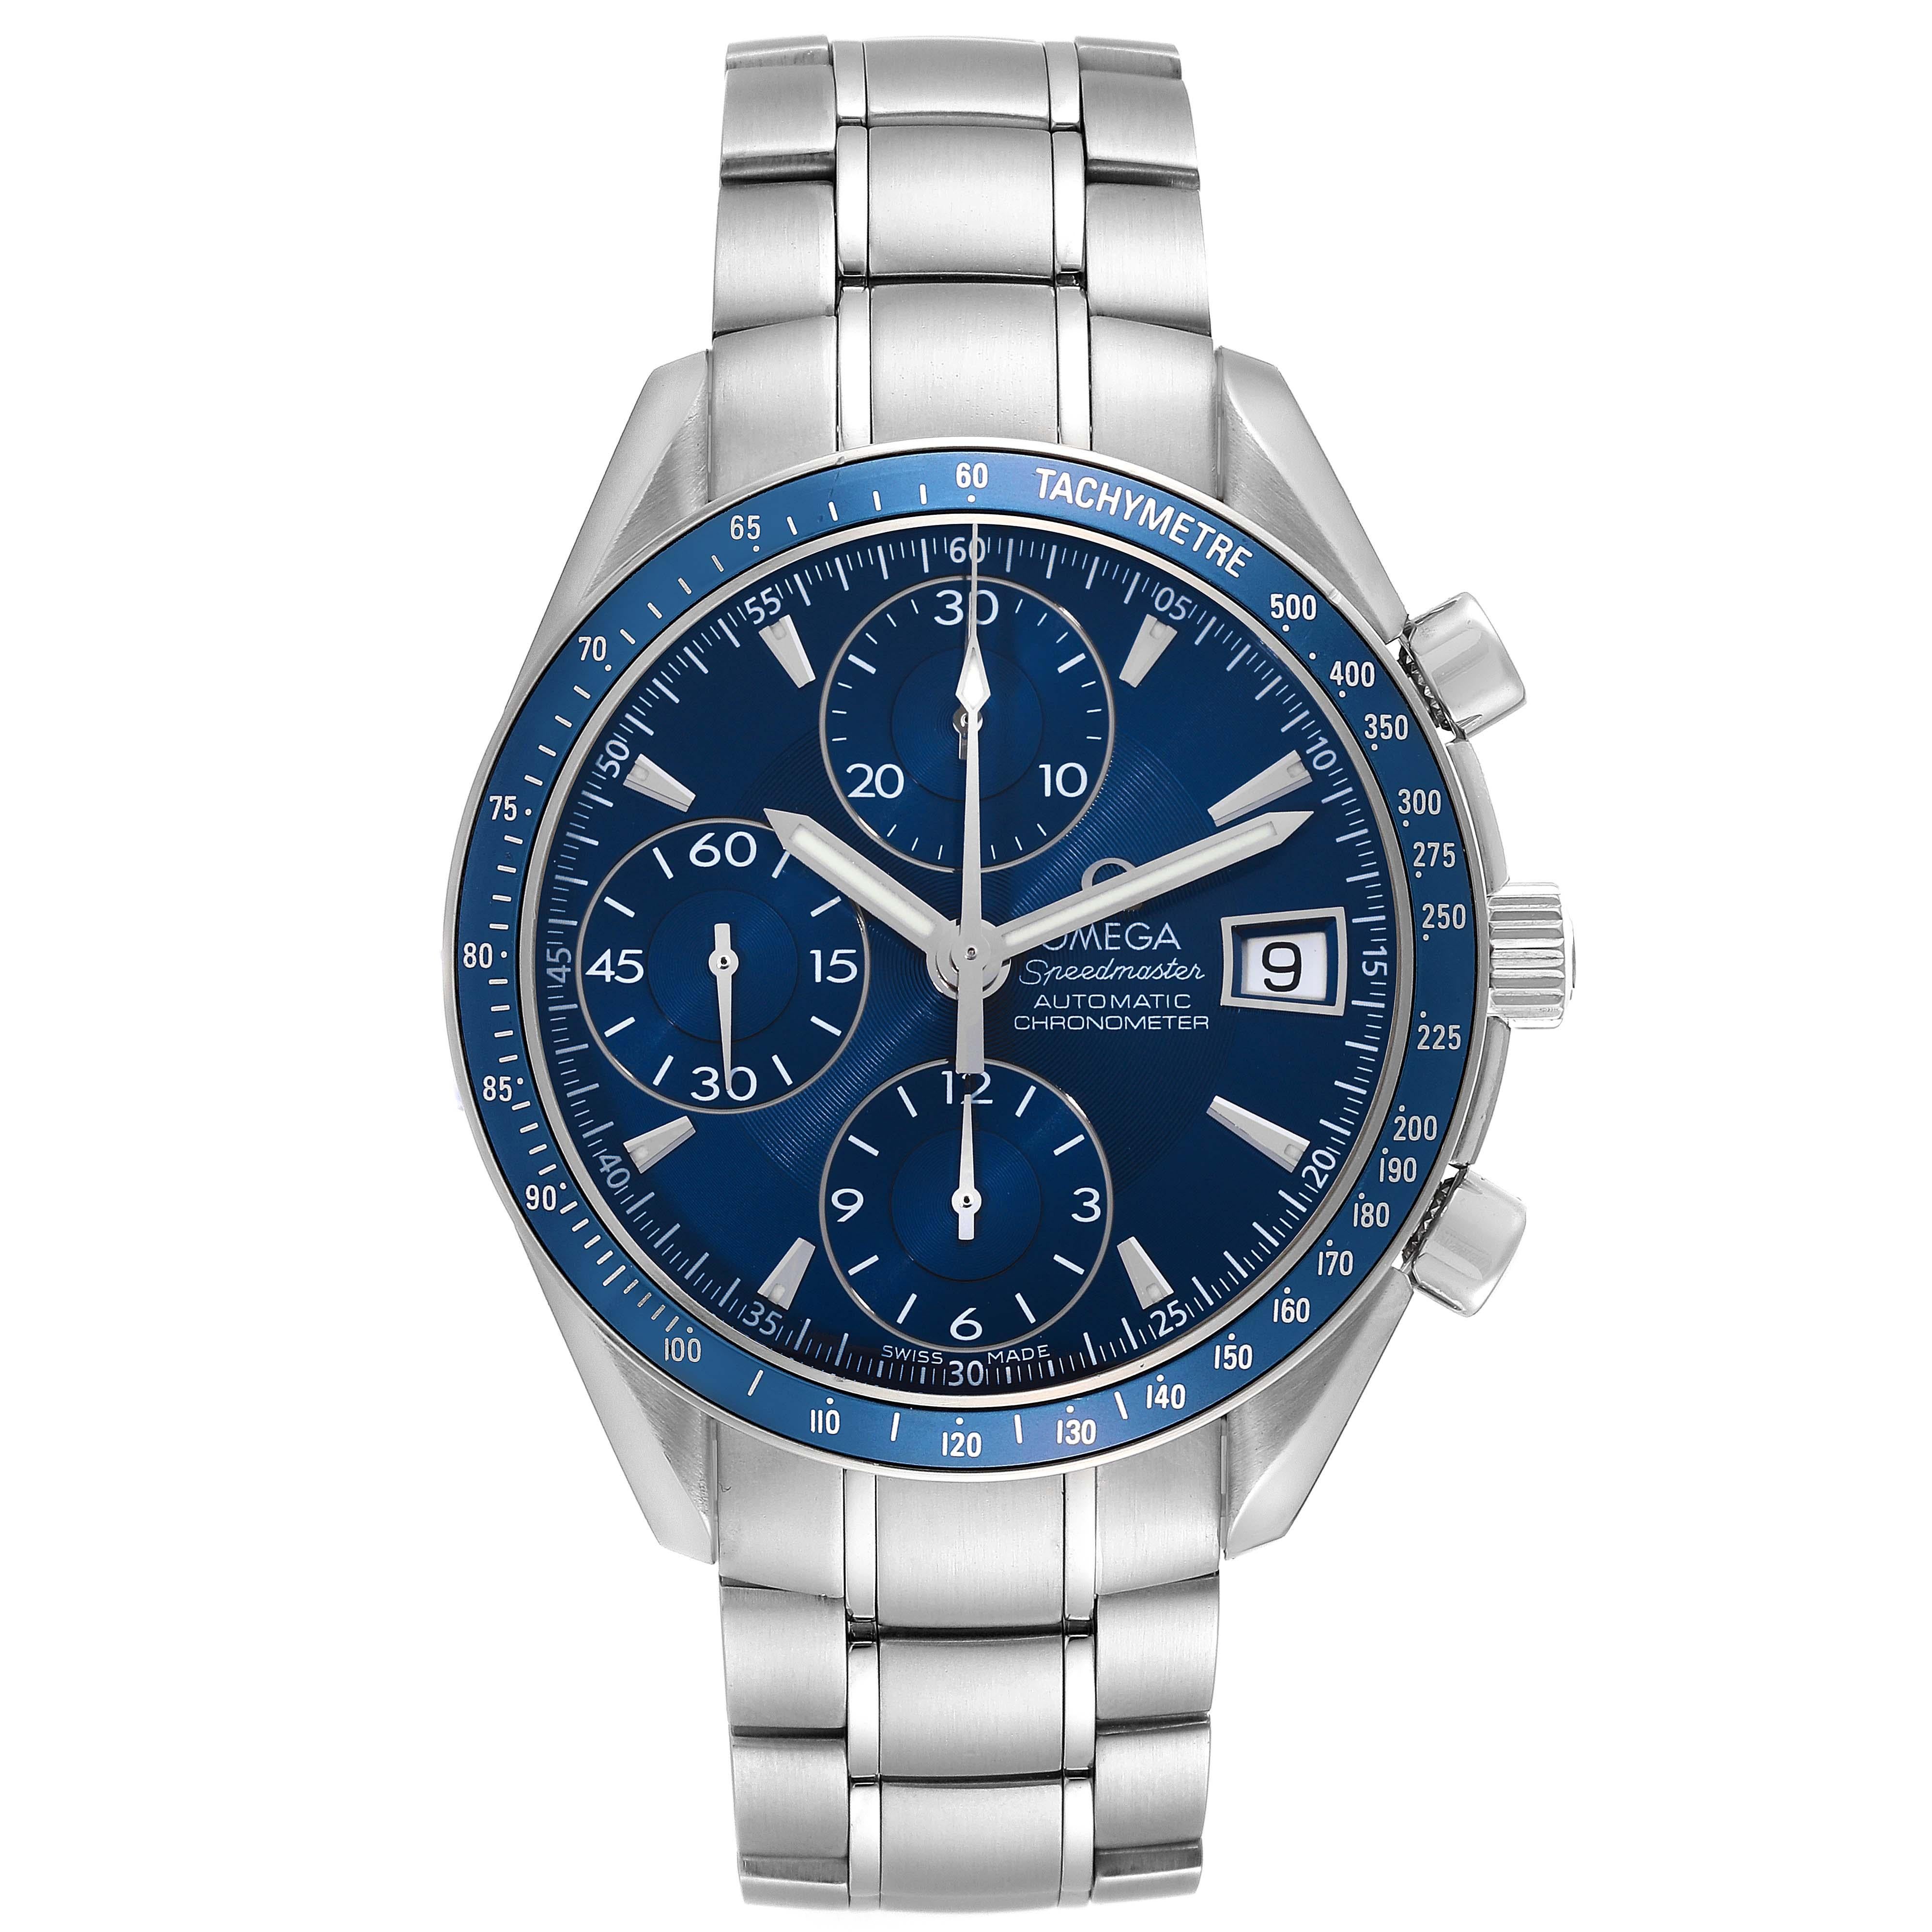 Omega Speedmaster Blue Dial Chronograph Steel Mens Watch 3212.80.00 Card. Automatic self-winding chronograph movement. Officially certified chronometer. Stainless steel round case 40.0 mm in diameter. Blue bezel with tachymeter scale.